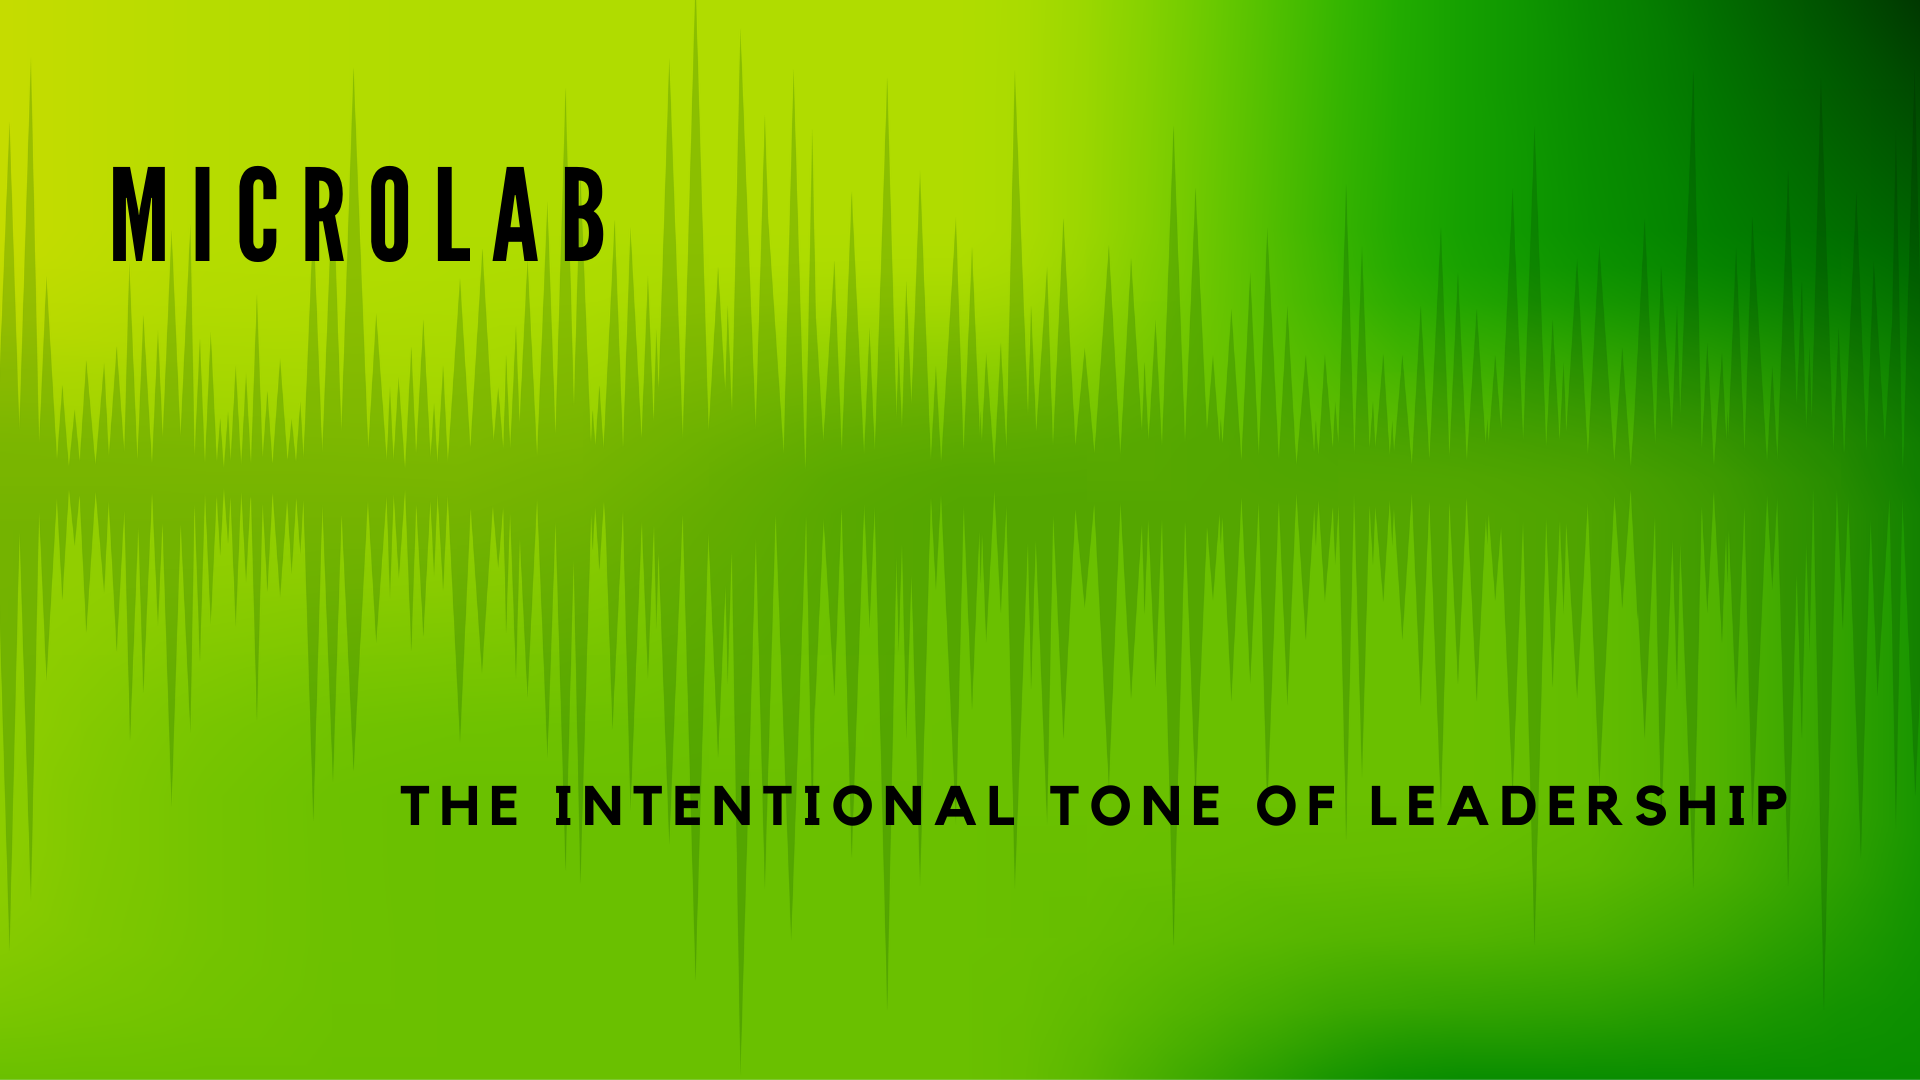 MicroLab: What Is Your Tone Saying?